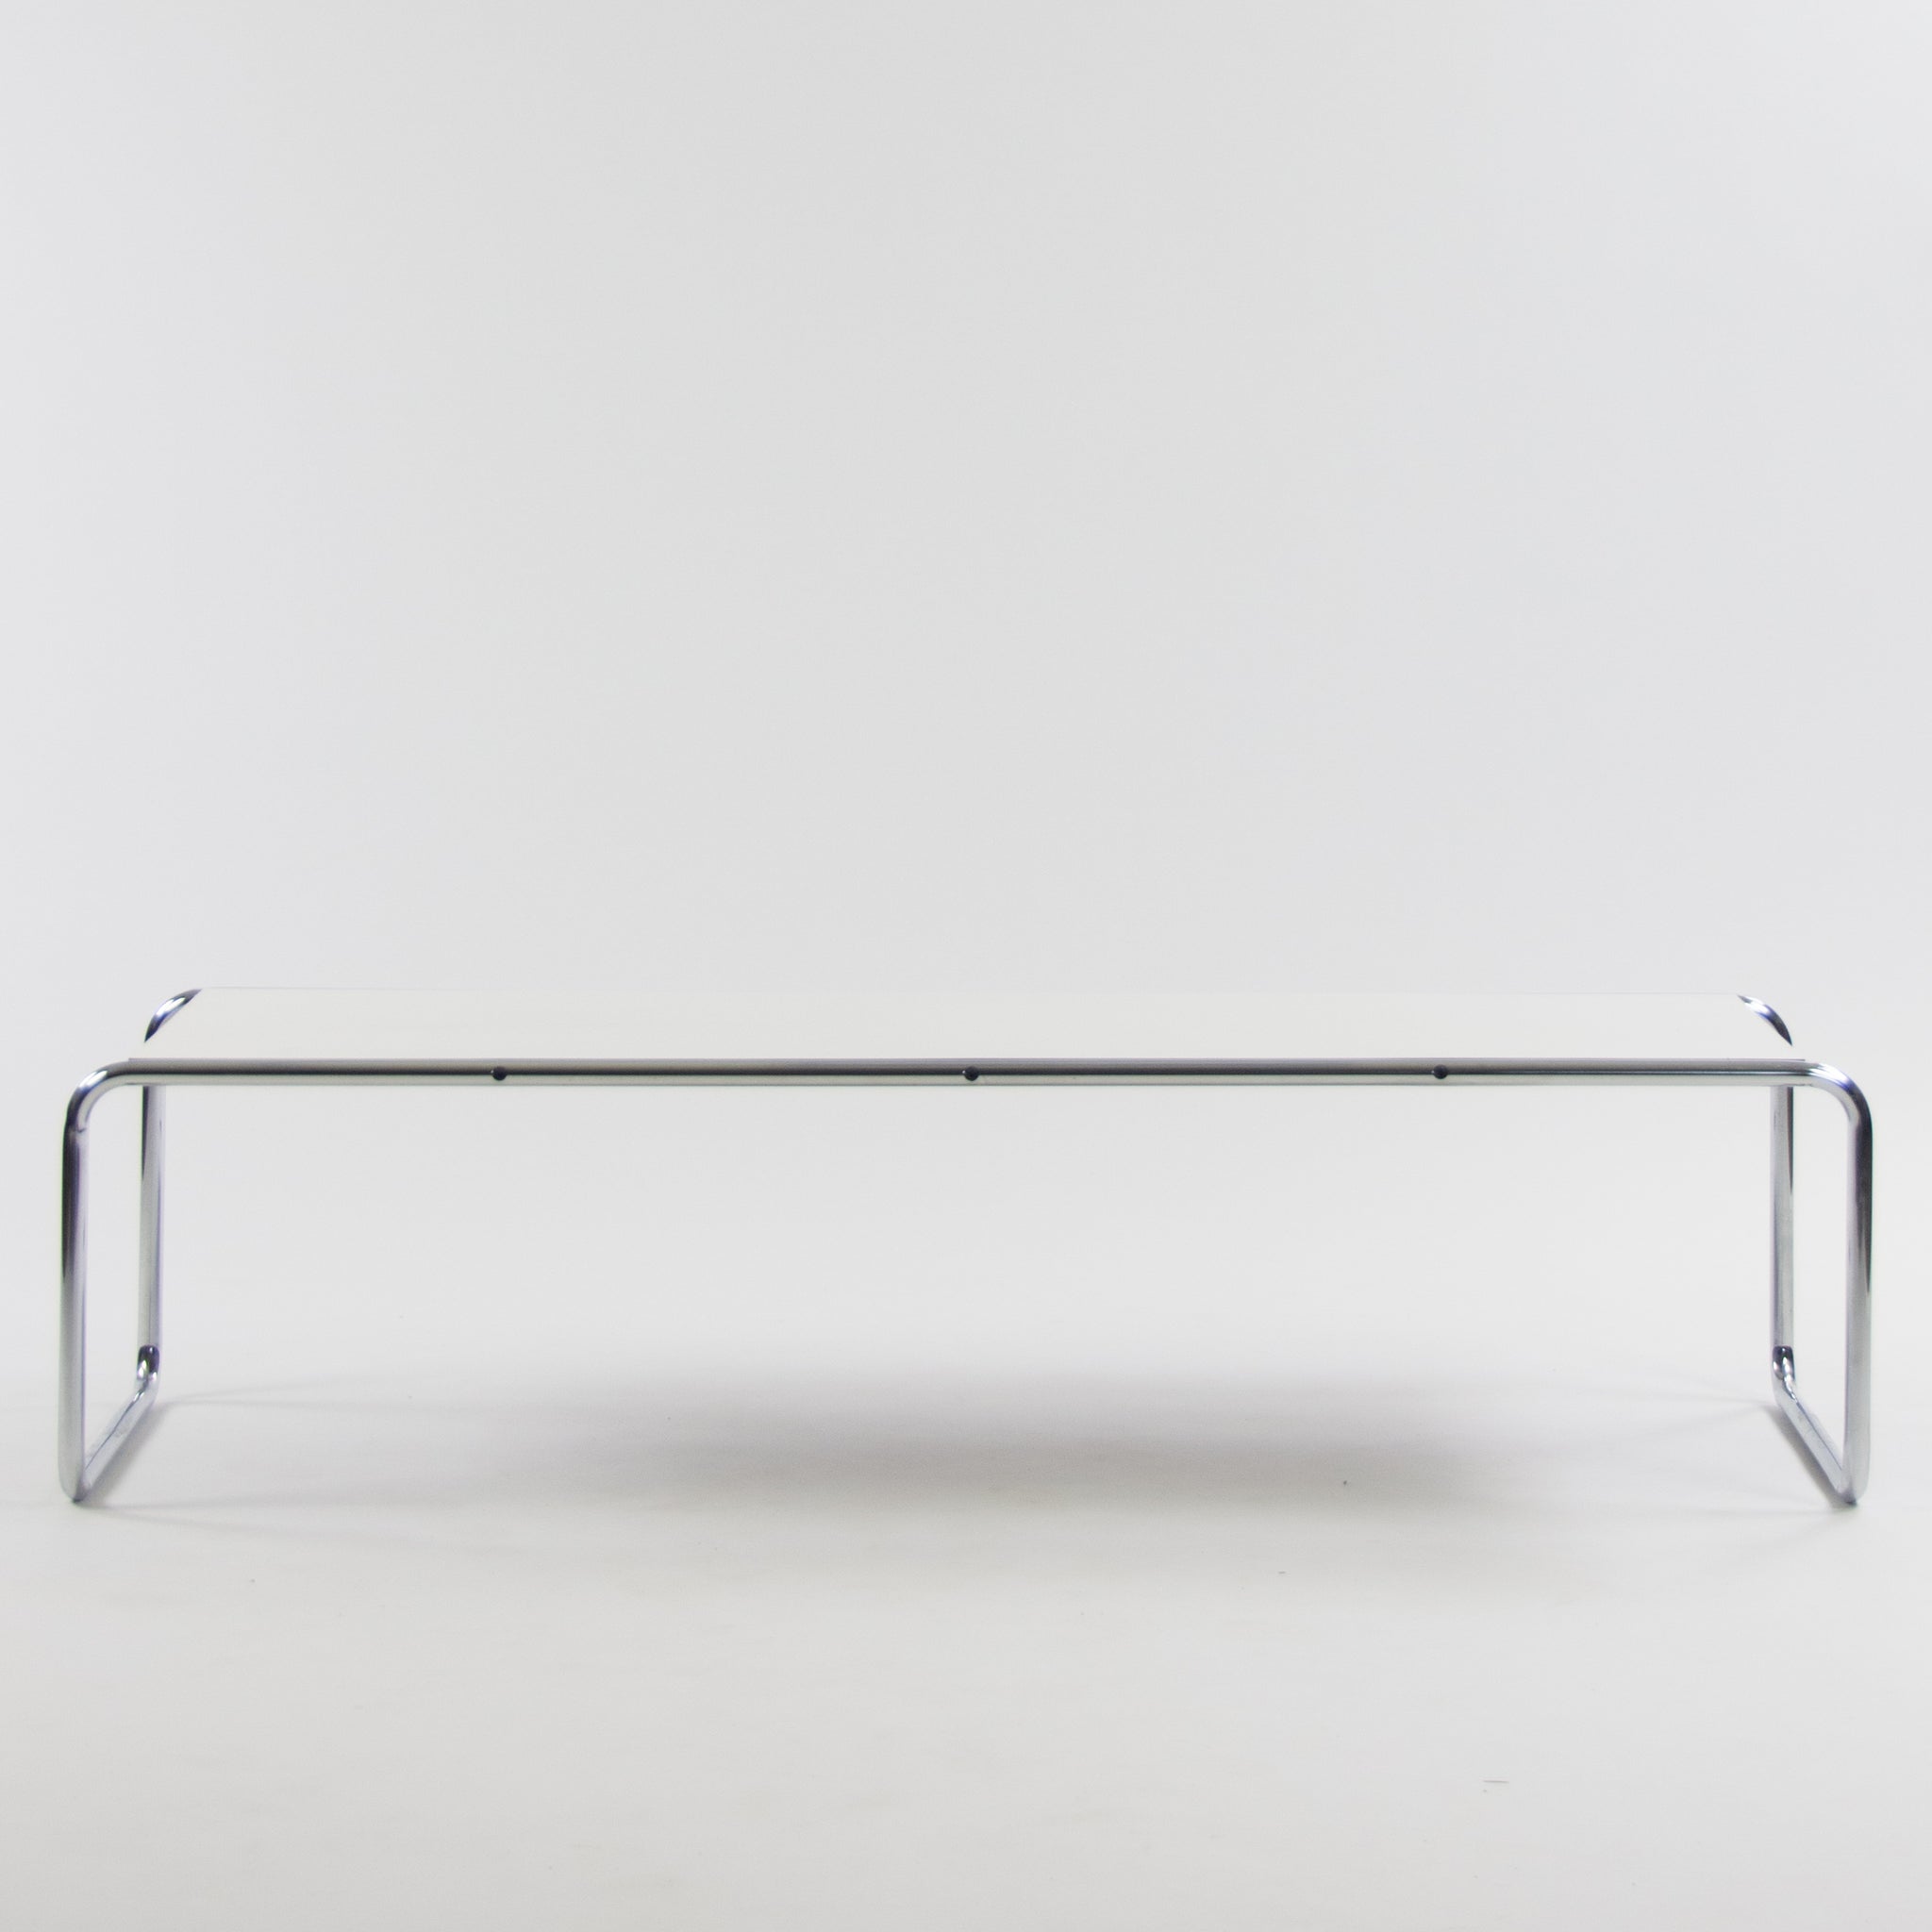 SOLD 1960's Vintage Marcel Breuer for Knoll International Laccio Coffee Table Italy